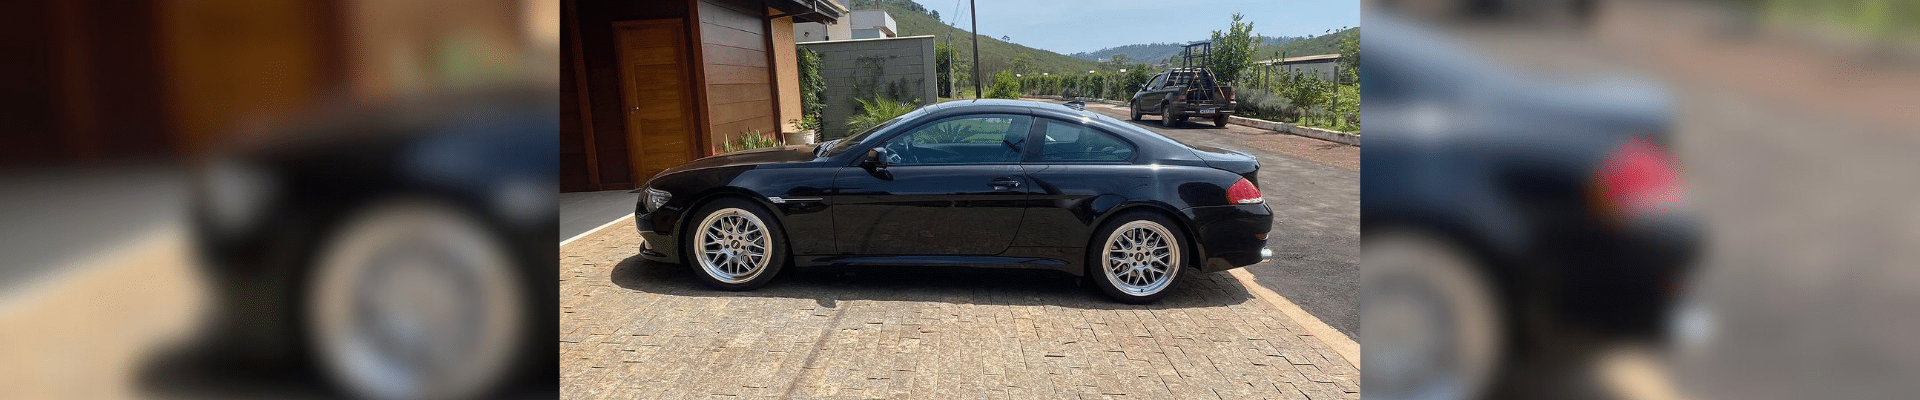 bmw 650 gallery image